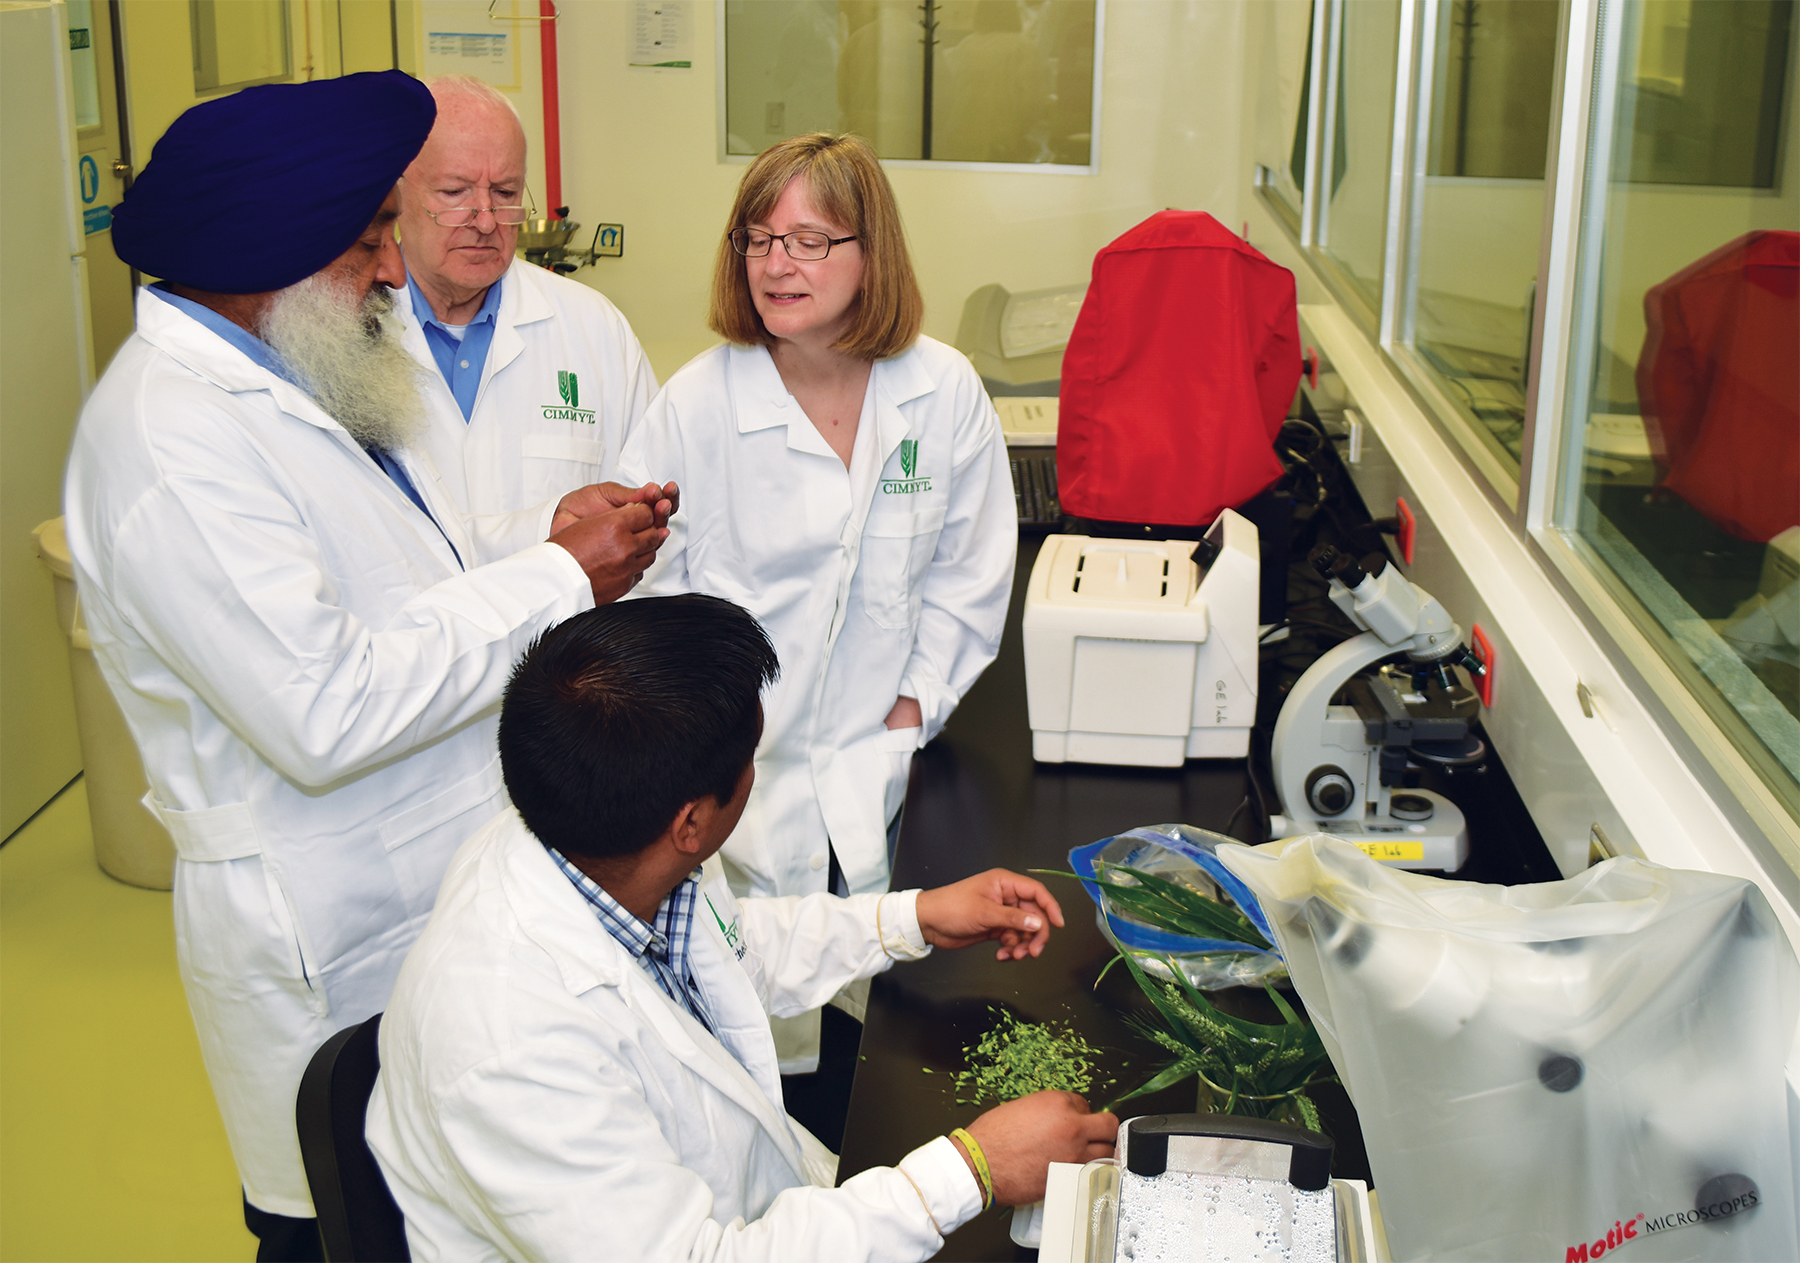 Kanwarpal Dhugga, CIMMYT Lead of Biotechnology Opportunities demonstrates how to separate an immature embryo from a developing wheat seed to 2Blades Program Director Lynne Reuber and Chairman Roger Freedman while Mario Pacheco, Biotechnology Assistant, isolates the seeds from wheat ears harvested from the greenhouse in the Carlos Slim Biosafety Laboratory. Photo: Alfonso Cortés Arredondo/CIMMYT 